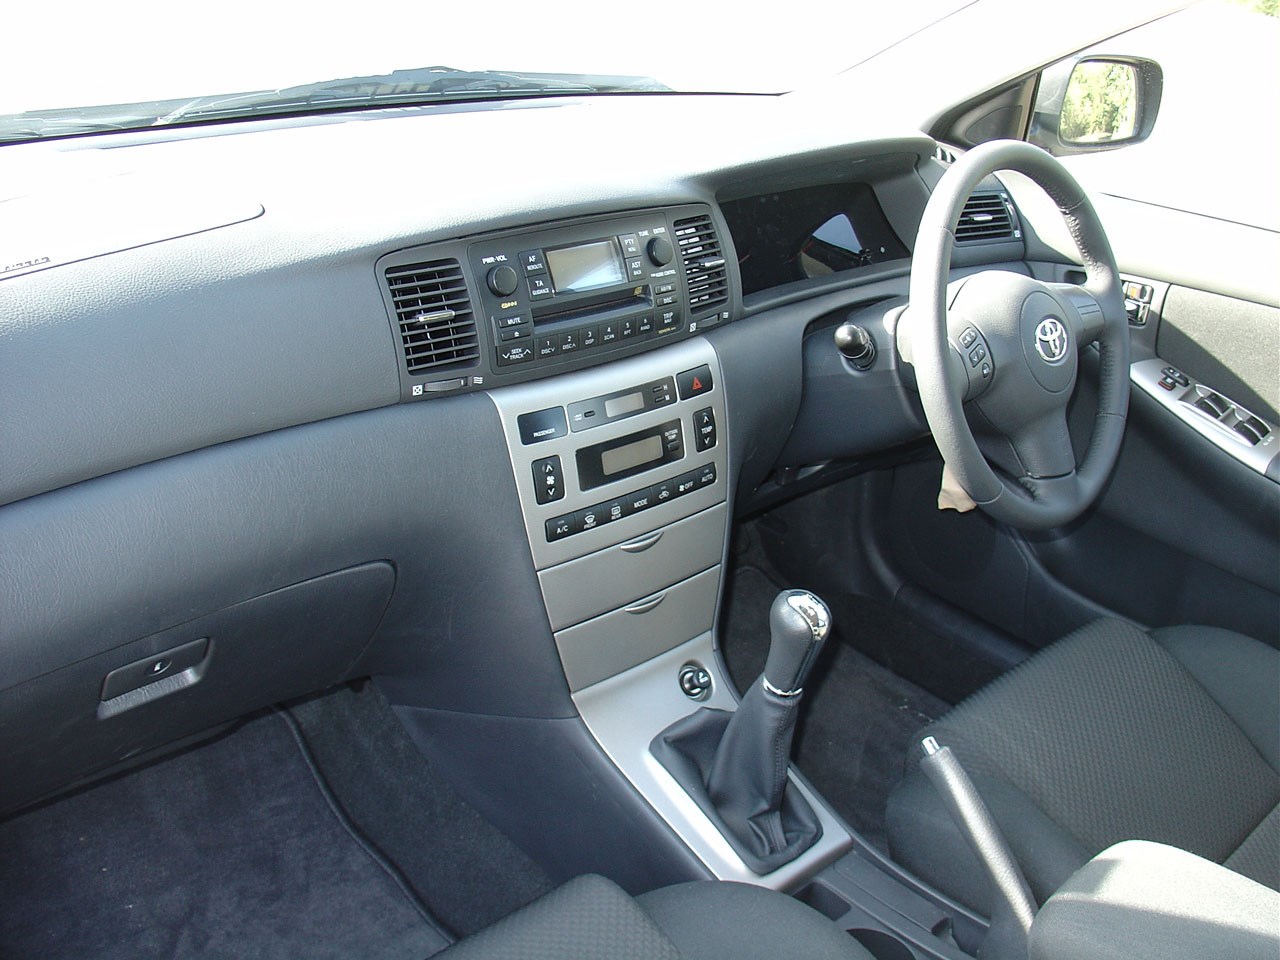 Used Toyota Corolla Hatchback 2002 2006 Interior Parkers